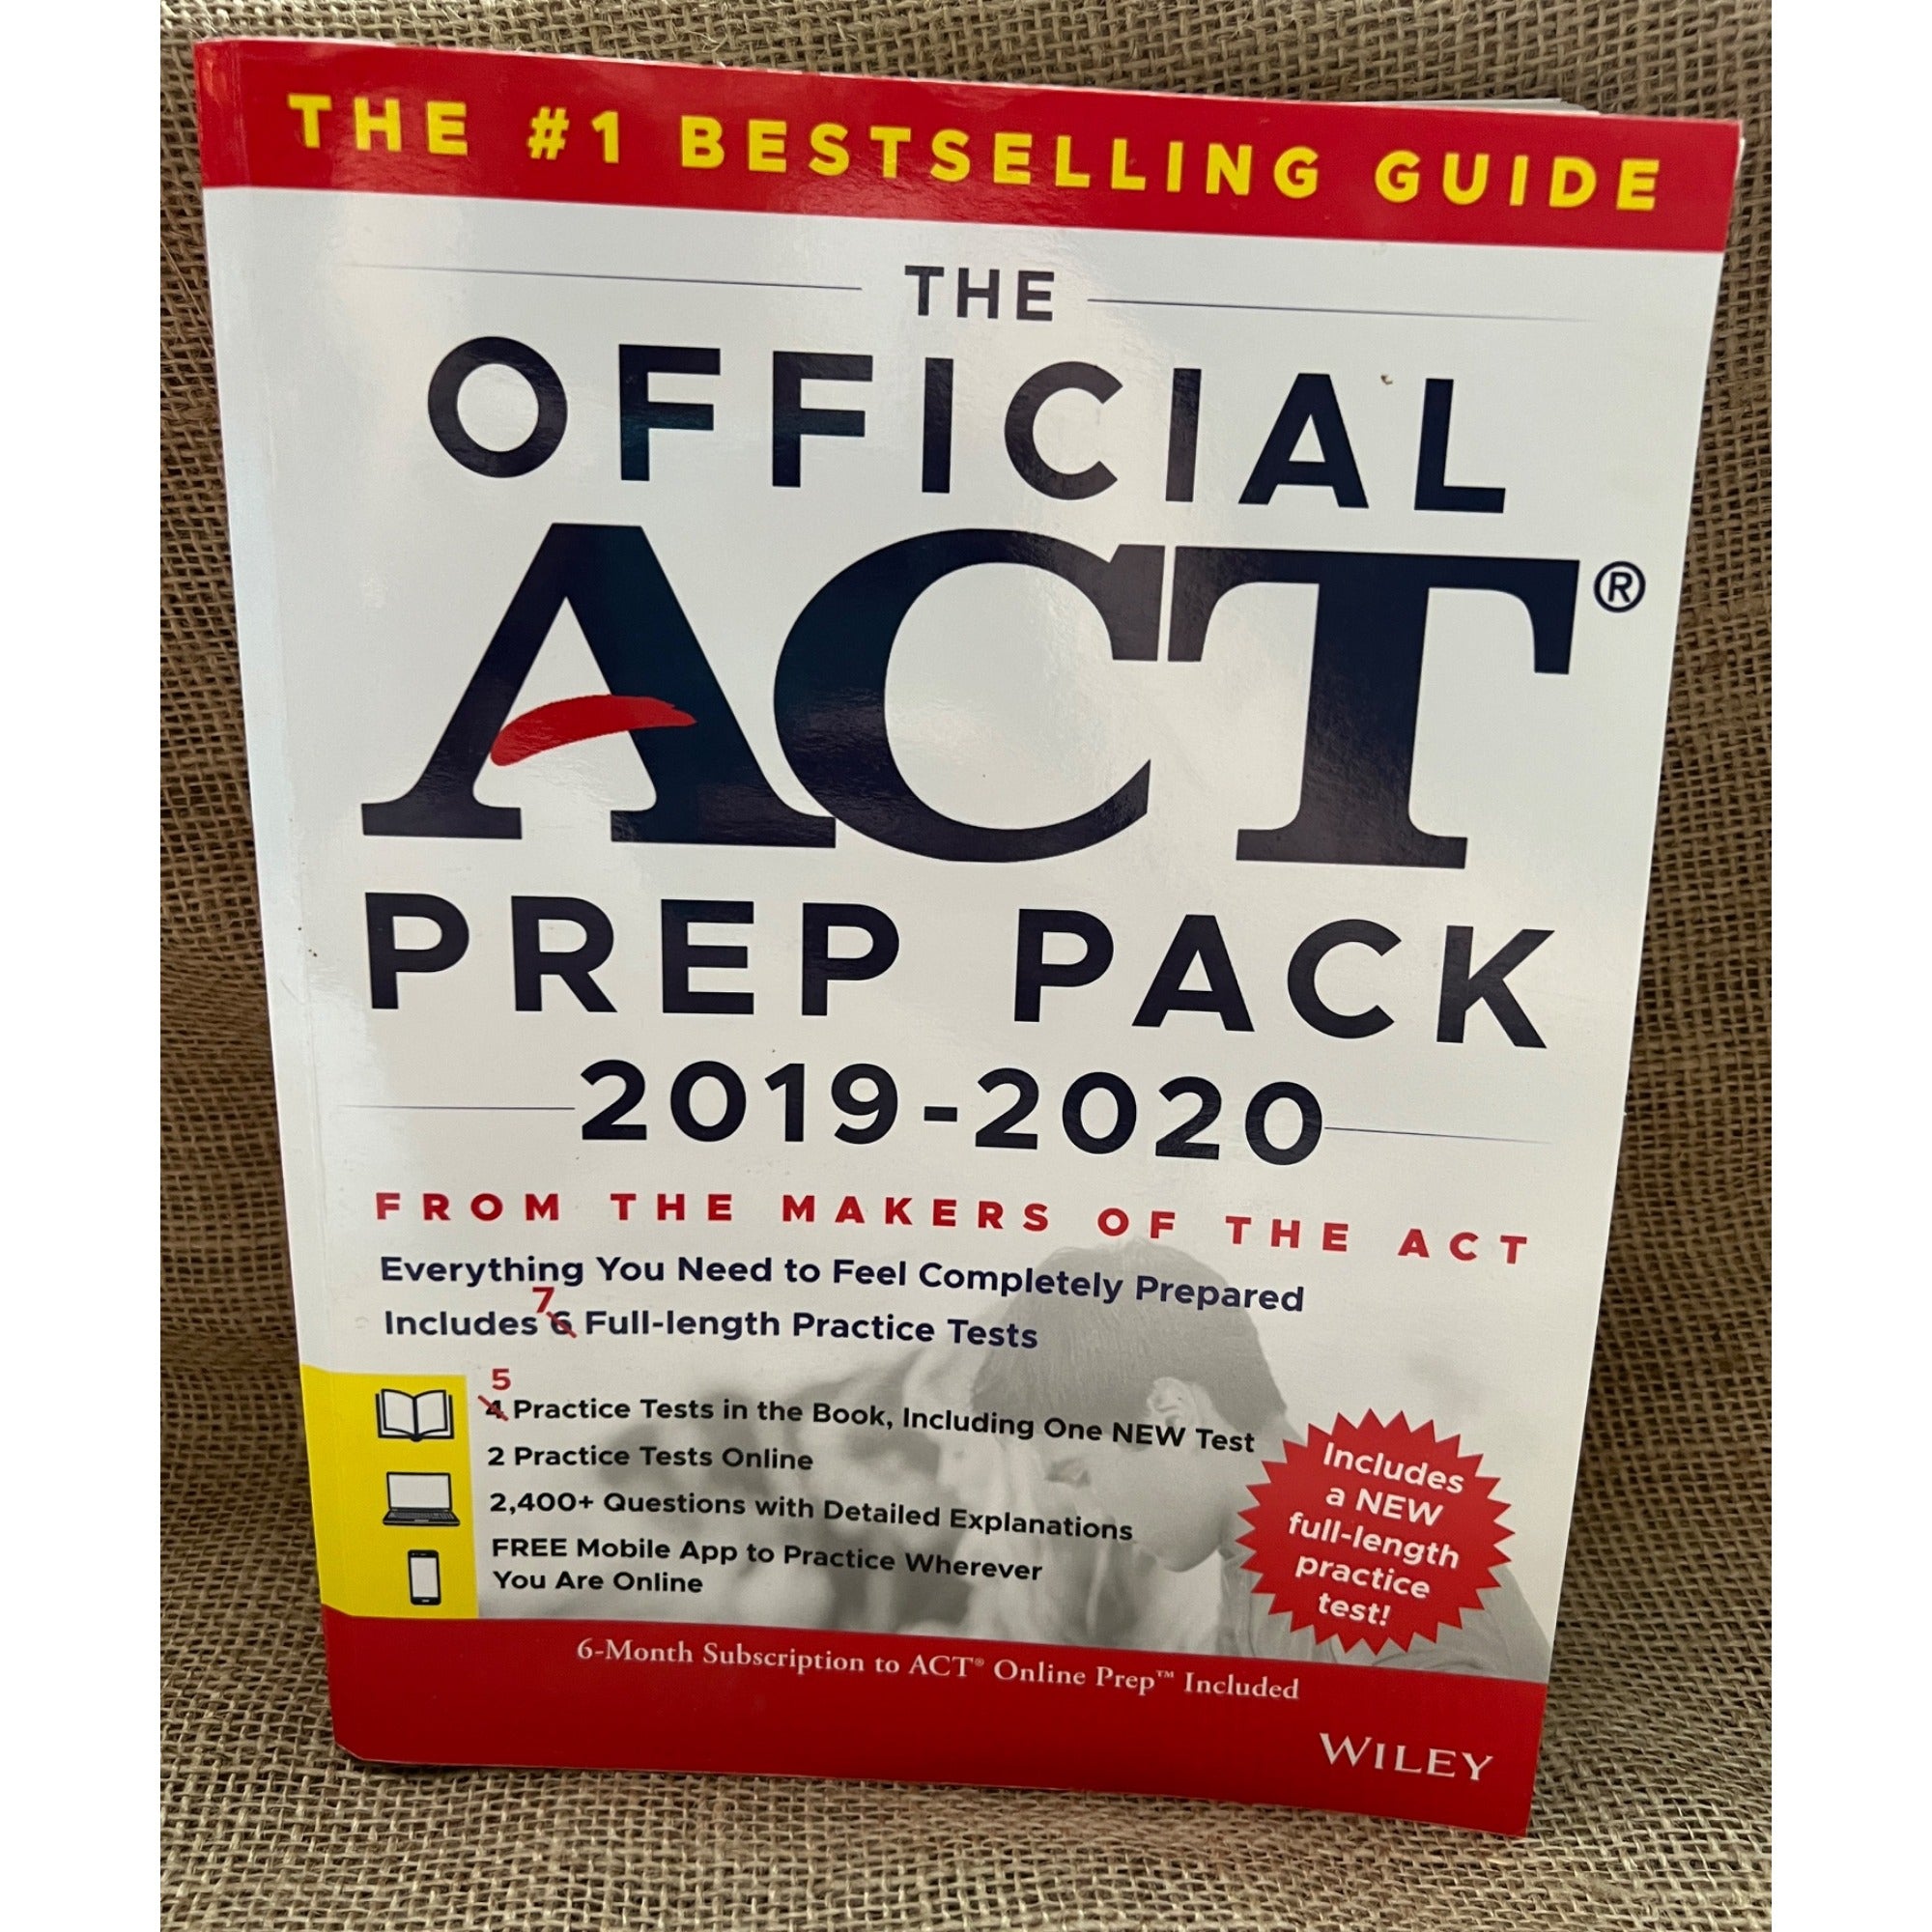 The Official ACT Prep Pack 2019-2020 from Wiley